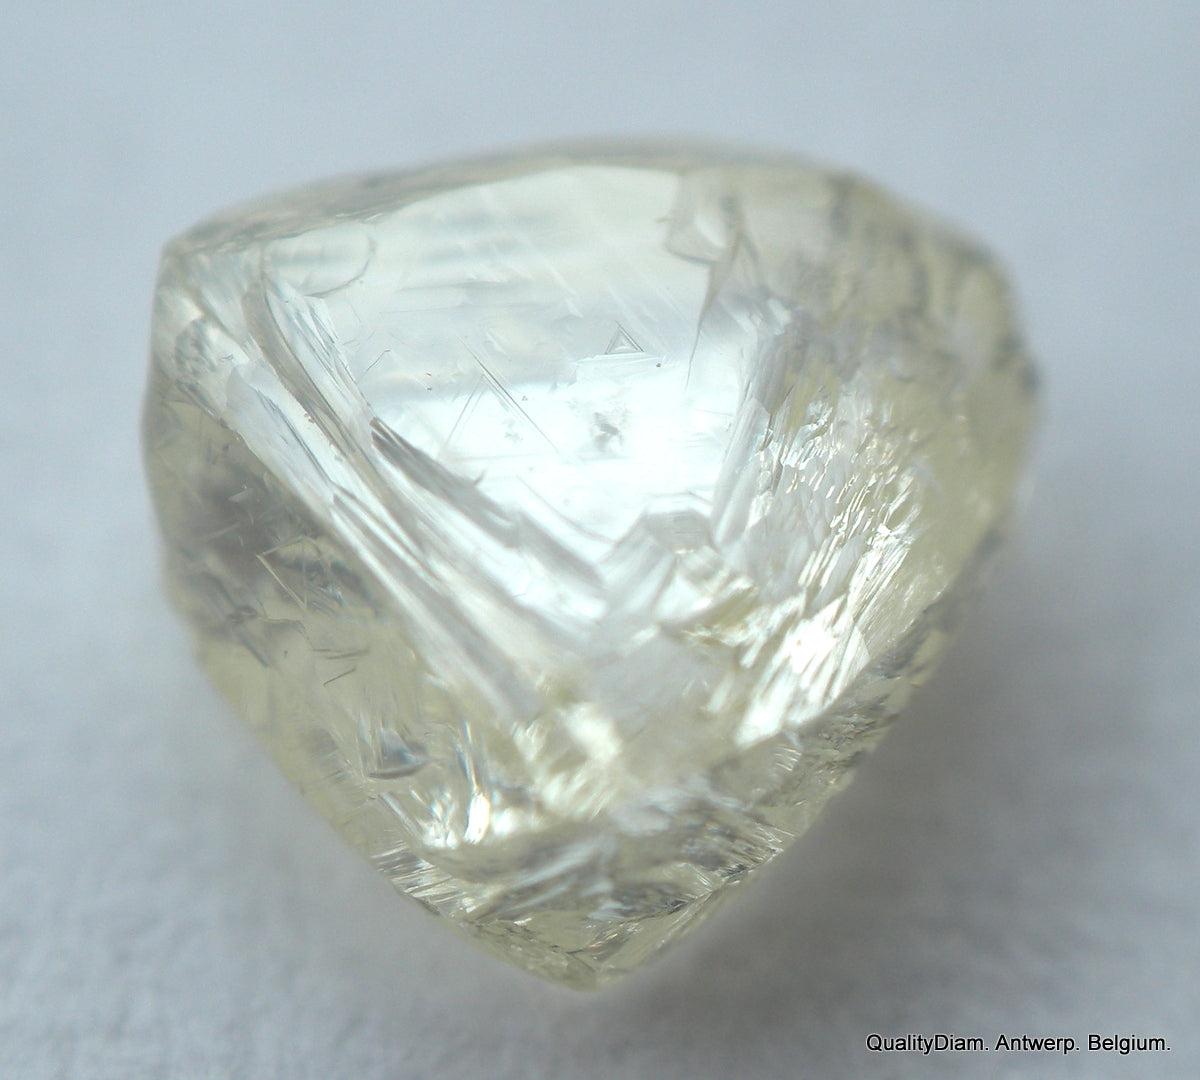 The Wonder of Mother Nature - Largest Rough Diamond - Gem Voyager